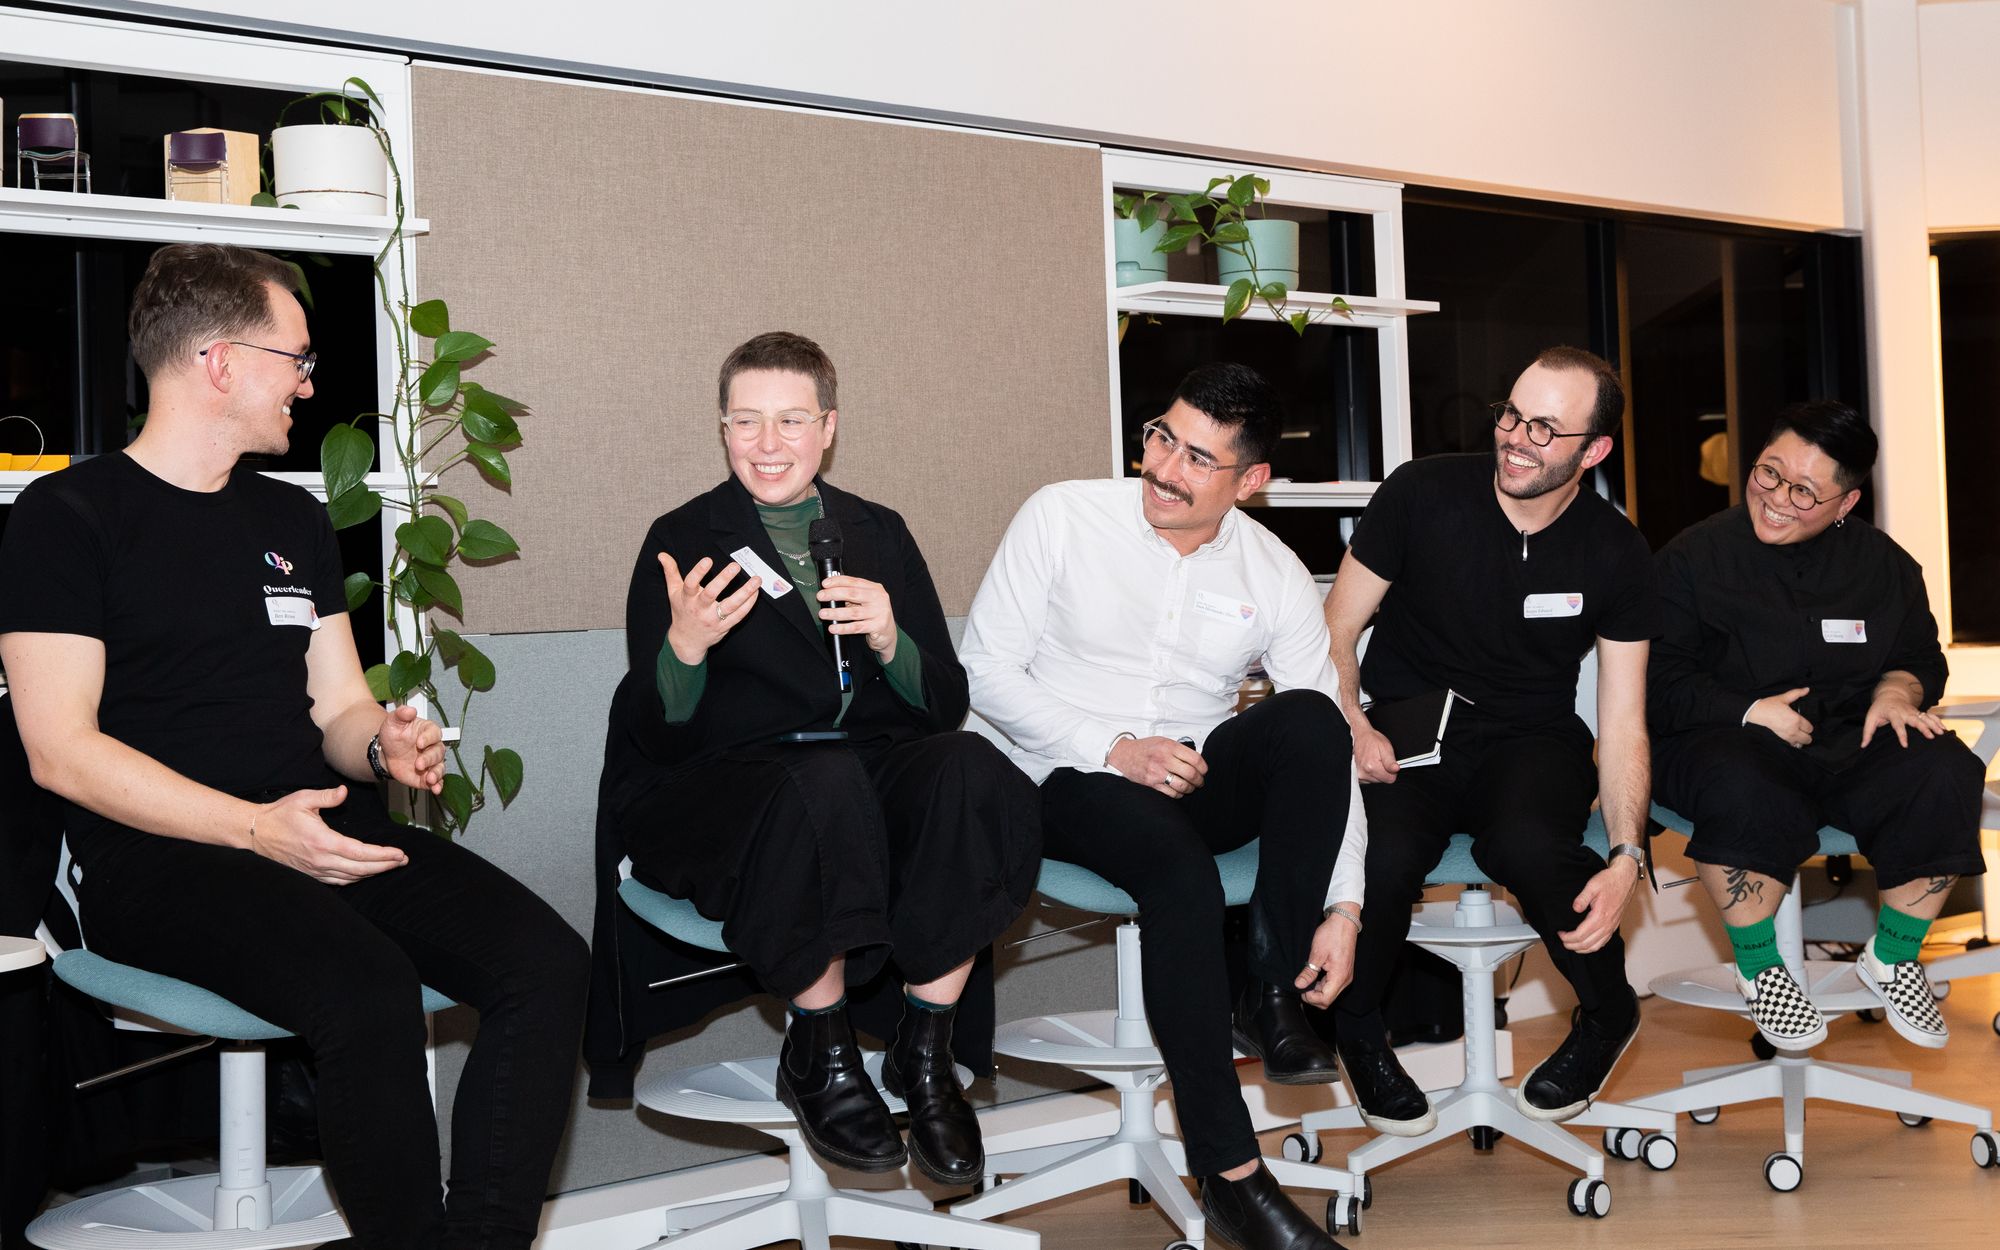 Queers in Property panel discussion at Living Edge in Melbourne showing panel speakers